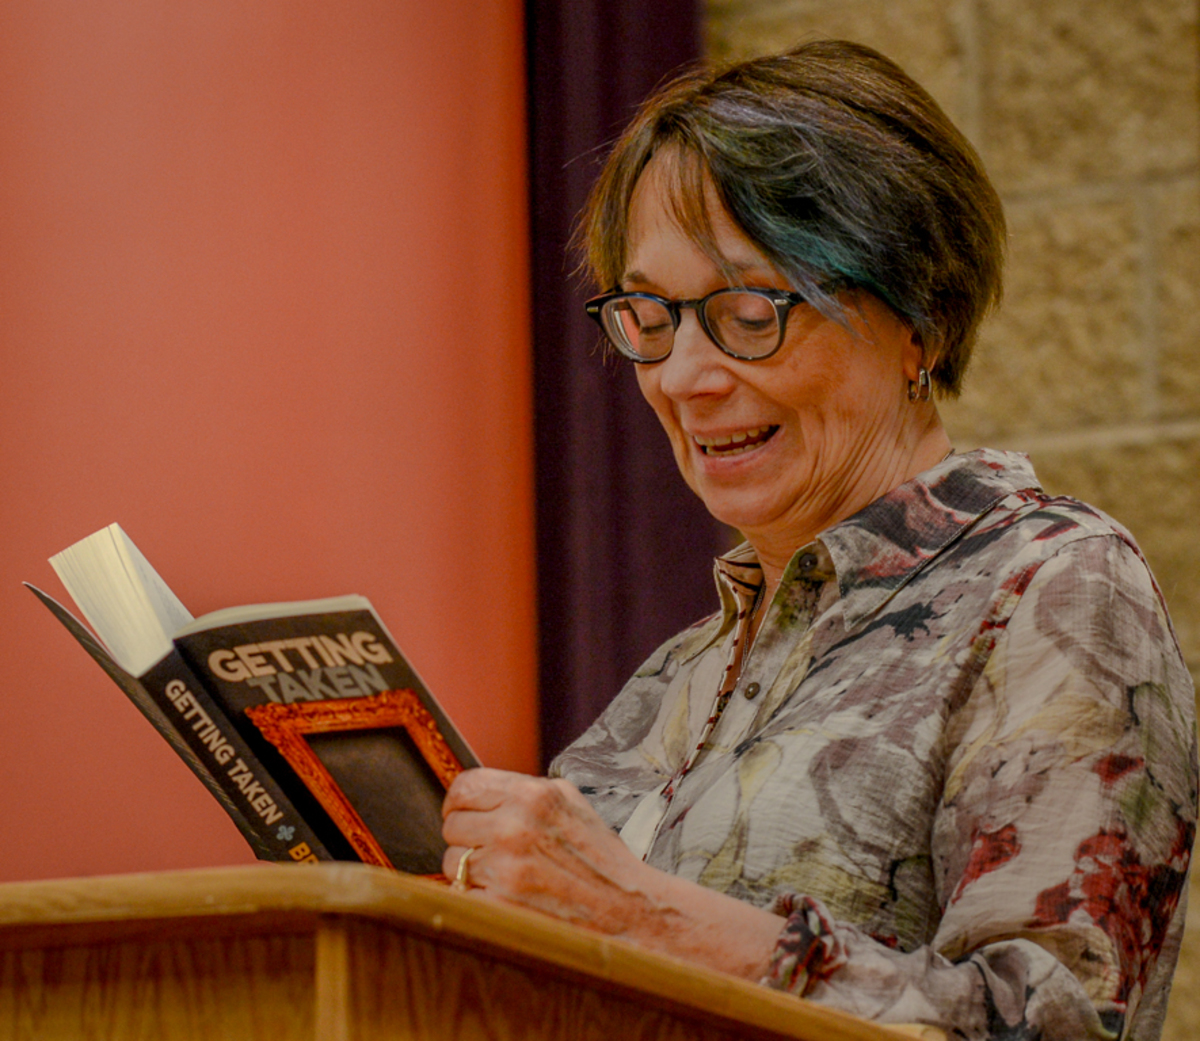 St. Charles author D. C. Brod reads reads from her ninth novel and responds to questions in H142 as part of the ECC writers series Thursday night Oct 19.